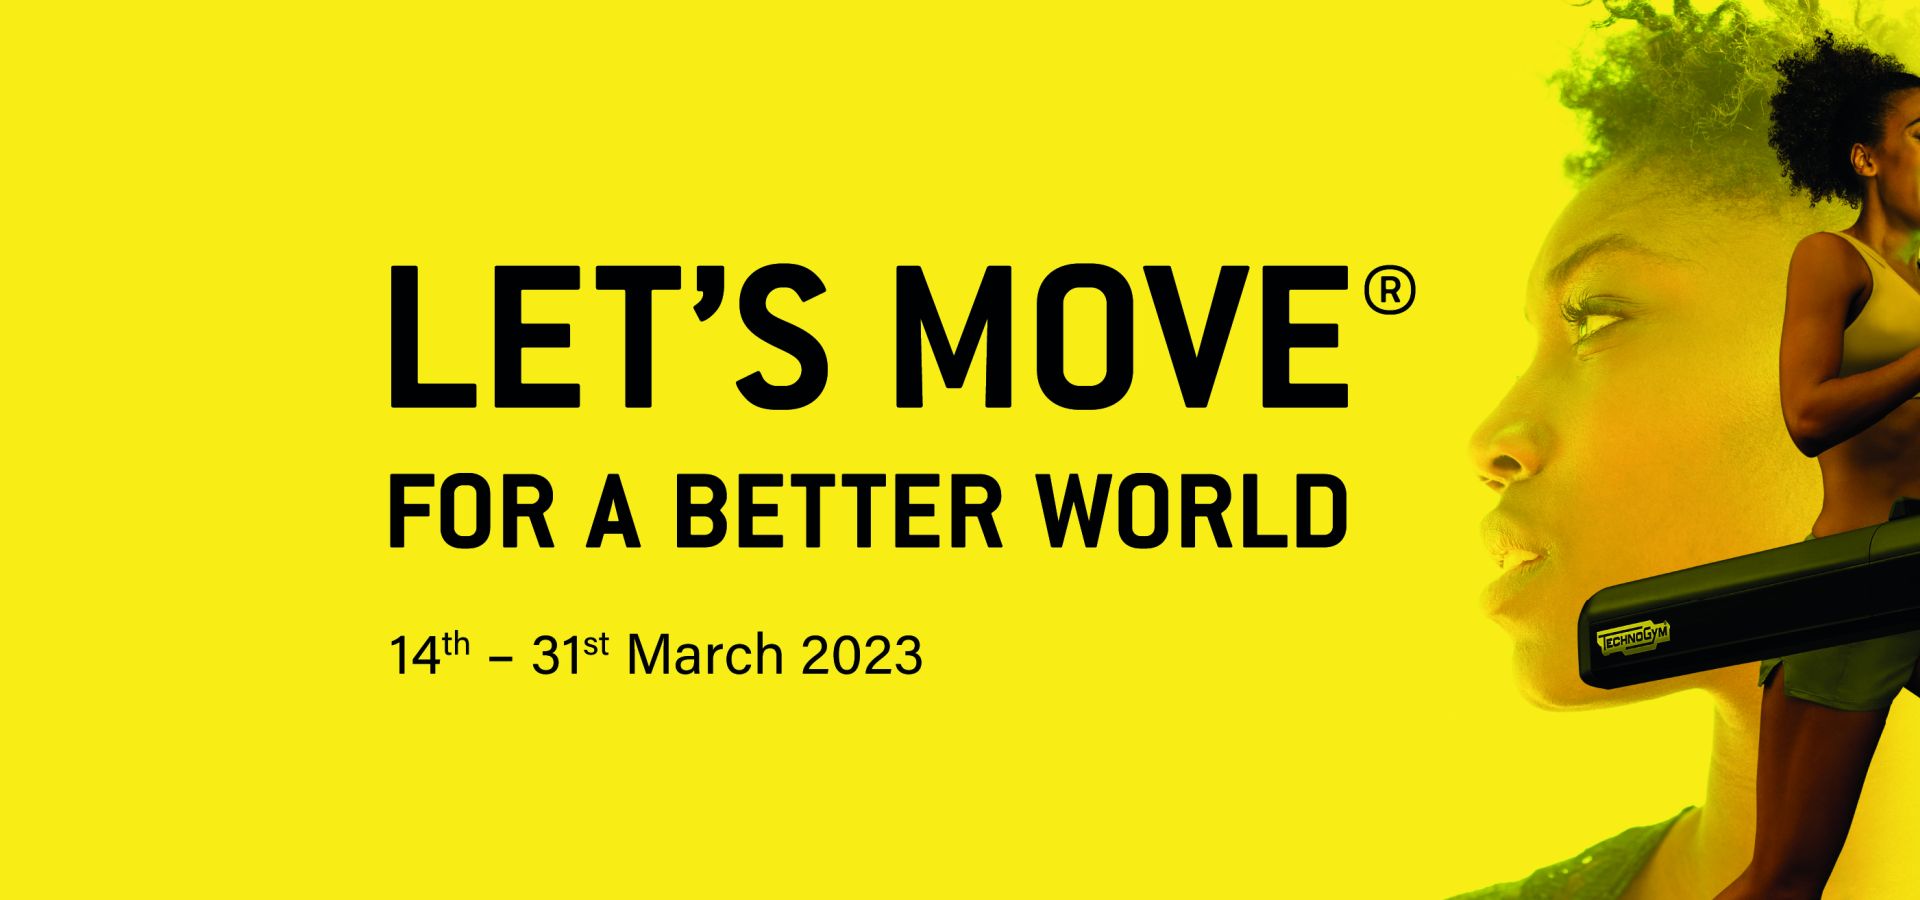 LET'S MOVE FOR A BETTER WORLD